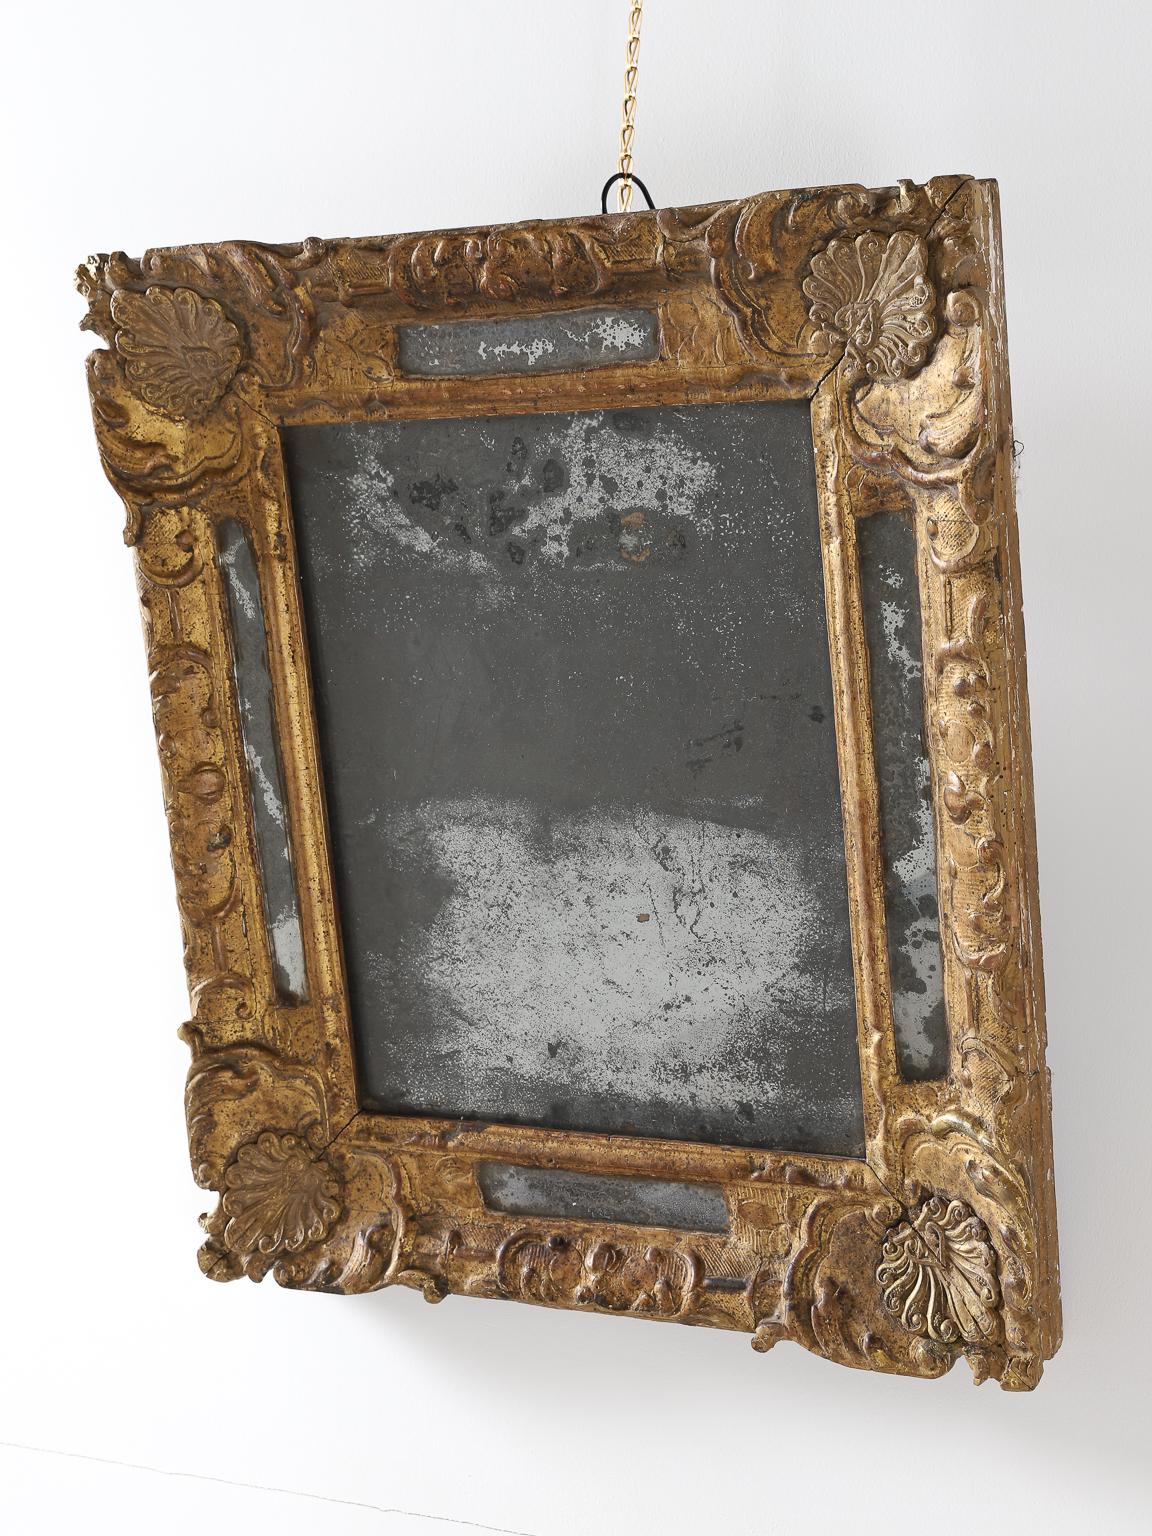 Elegant 17th century hand carved oak wall mirror. High-quality Louis XIV period framing with gold leaf gilding.